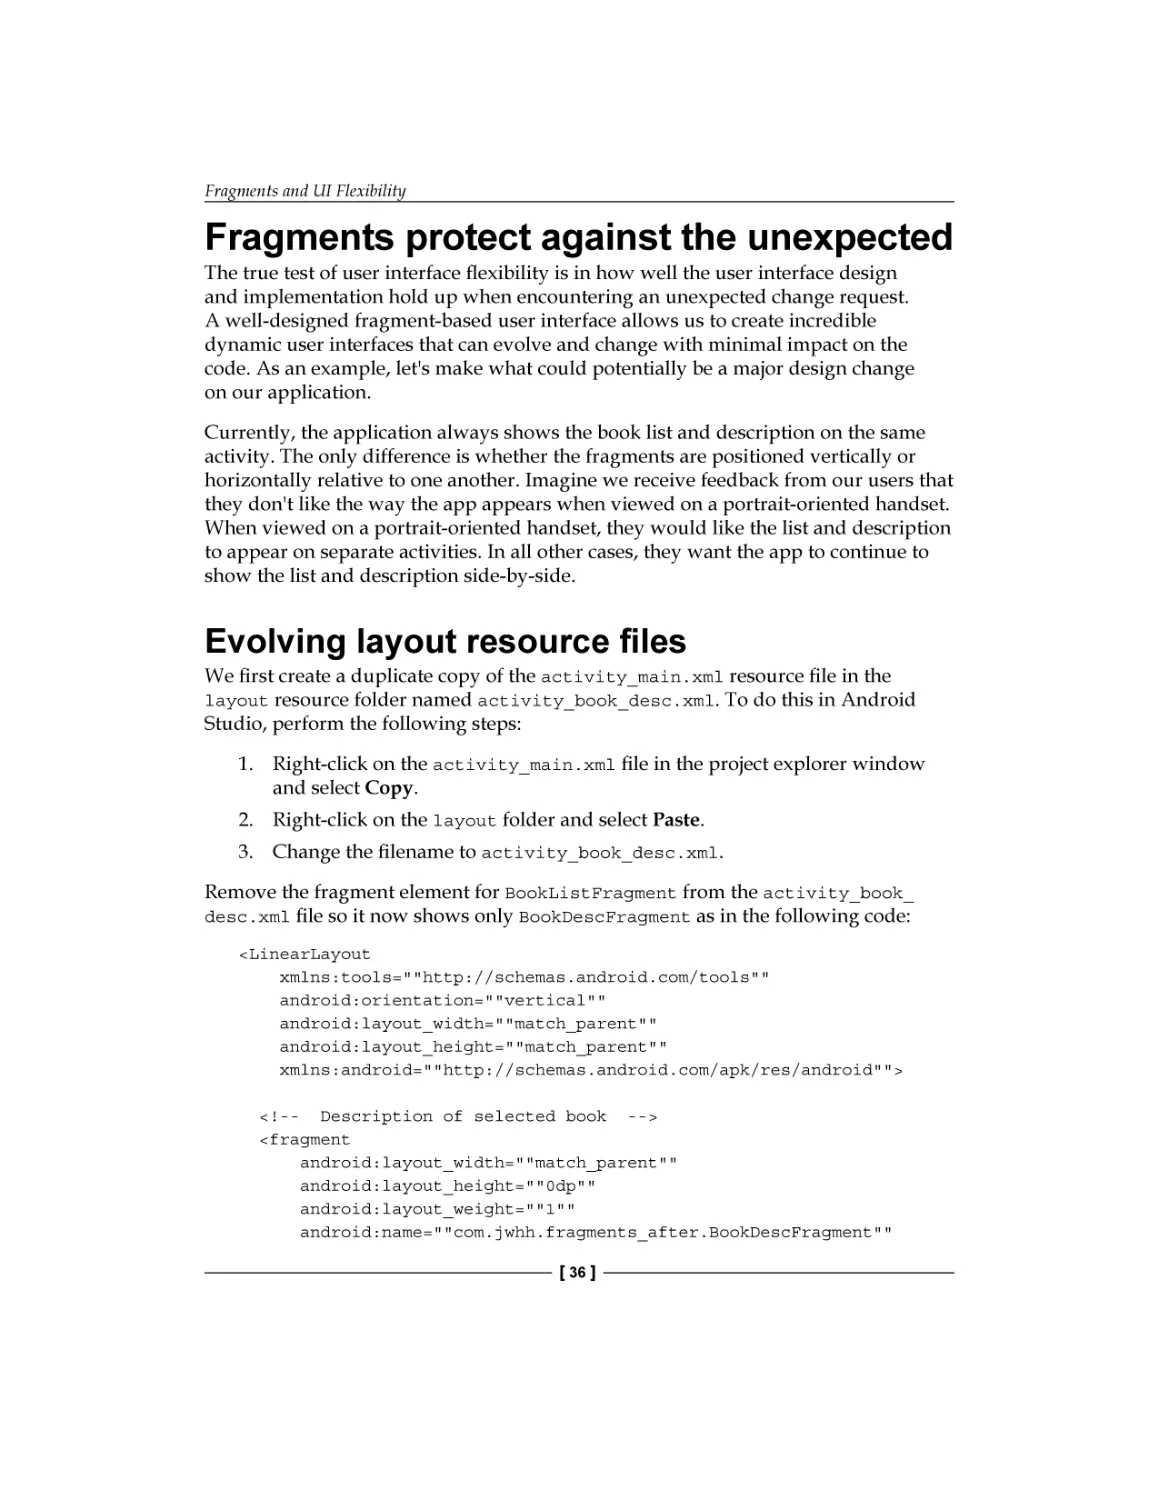 Fragments protect against the unexpected
Evolving layout resource files